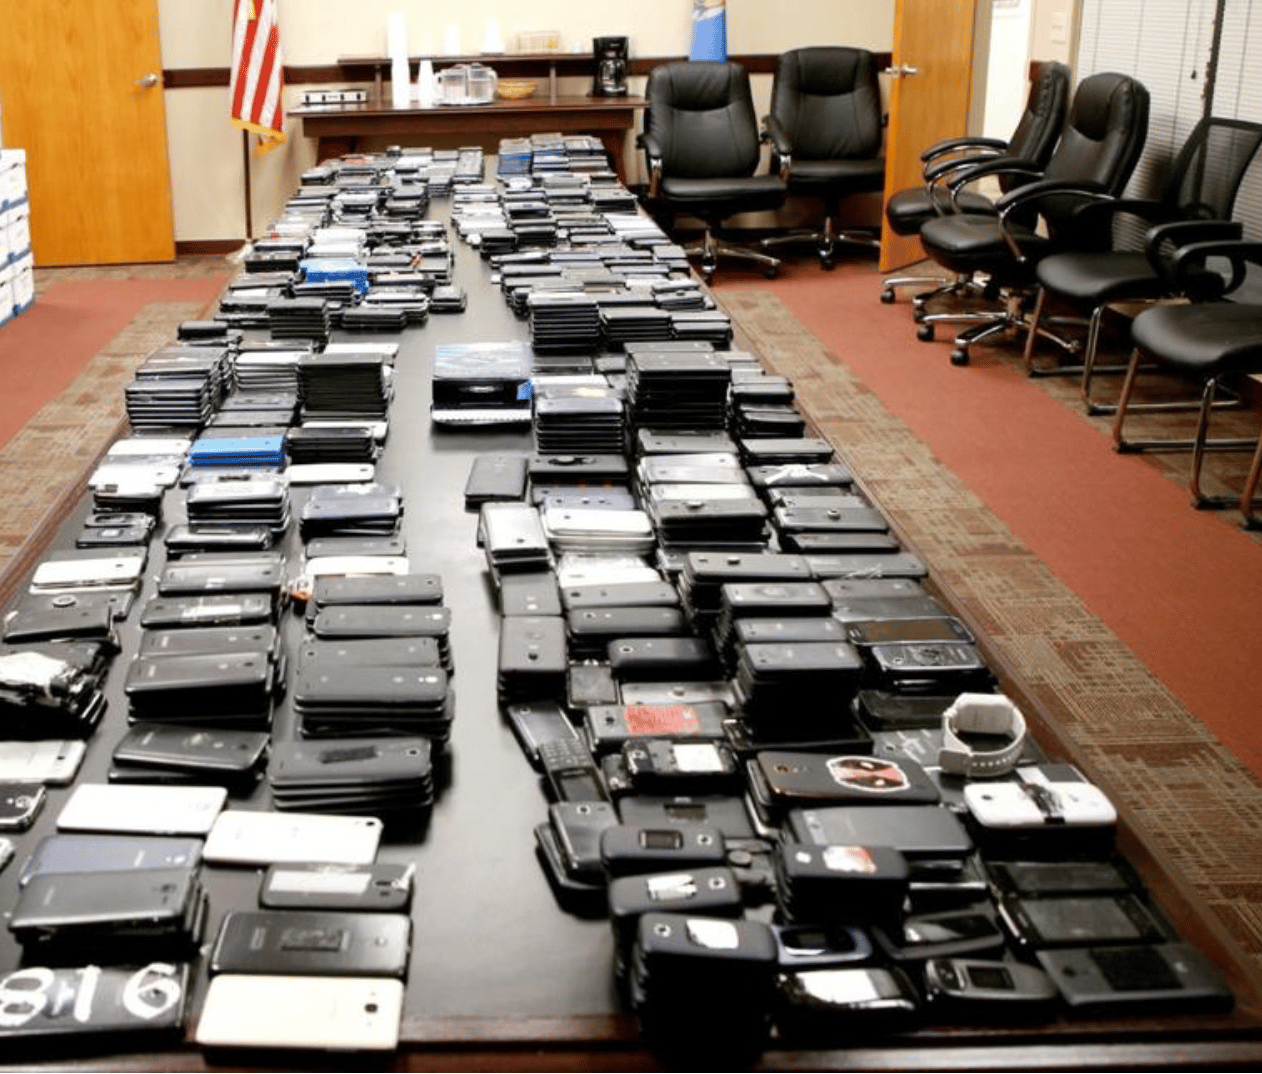 More than 1,600 cellphones that were taken from inmates in different Oklahoma prisons are displayed on a table at the Department of Corrections offices in Oklahoma City in 2018.